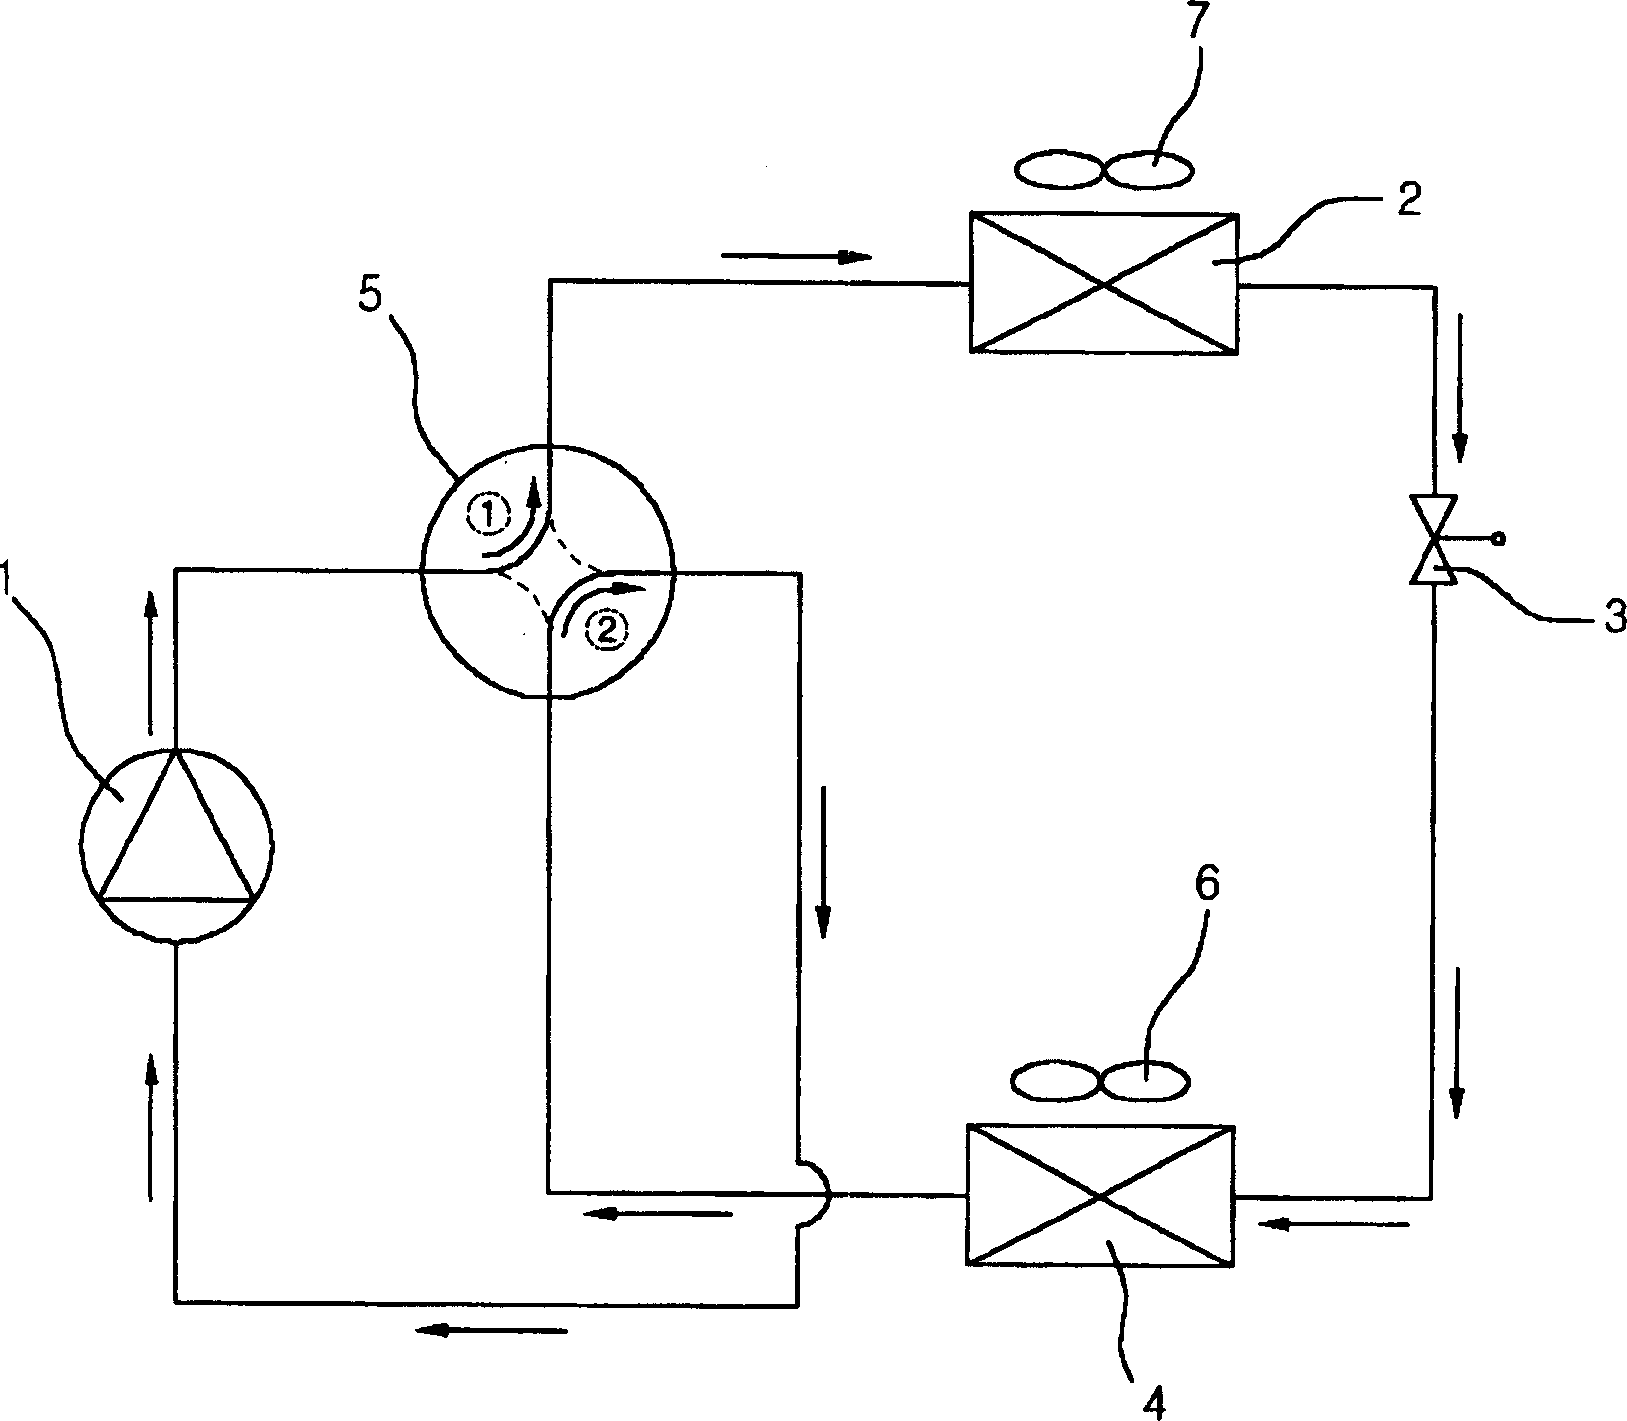 Air conditioner comprising heat exchanger and means for switching cooling cycle